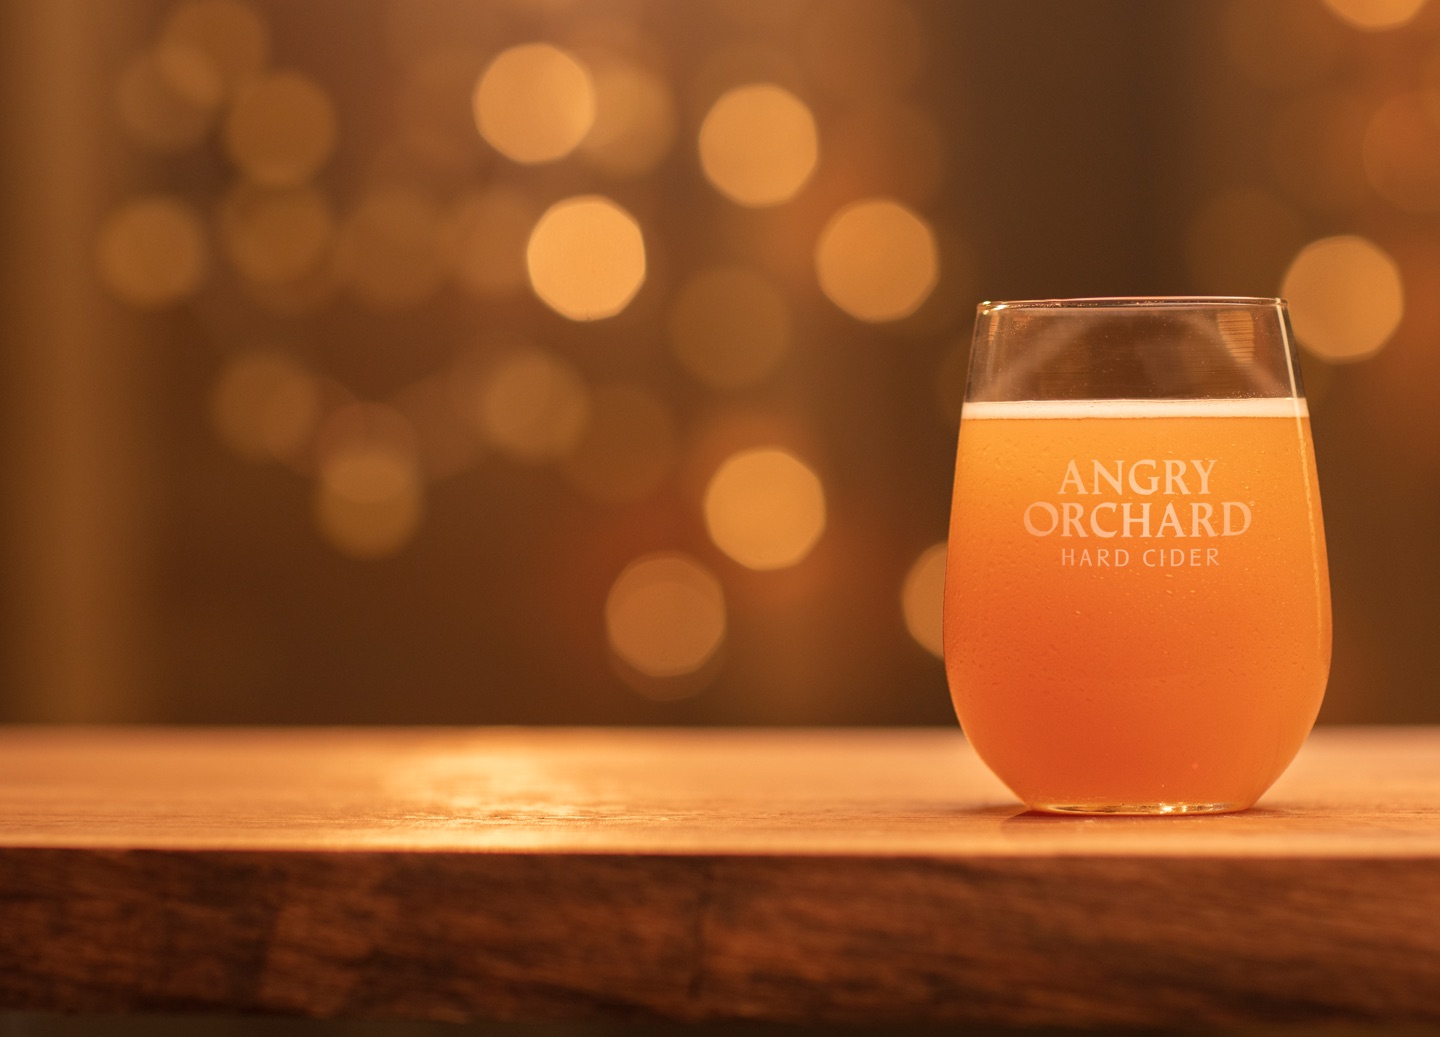 Angry Orchard Unfiltered Hard Cider in a glass